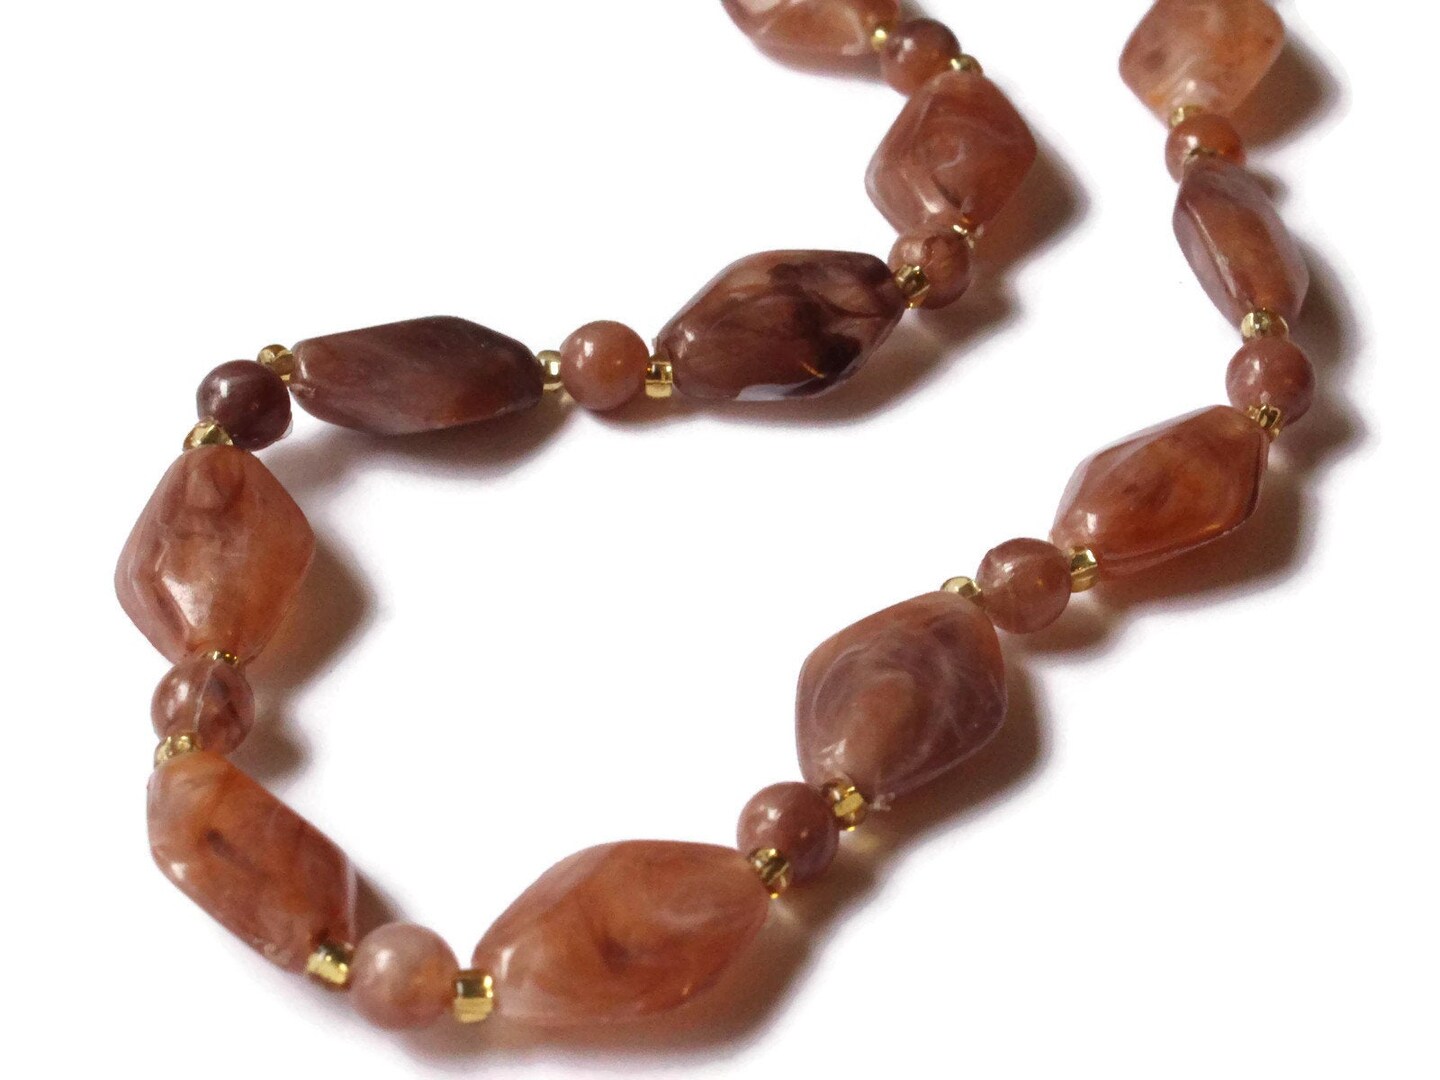 18 Inch Brown Beaded Necklace New Old Stock Jewelry Stocking Stuffer Beaded Choker Necklace